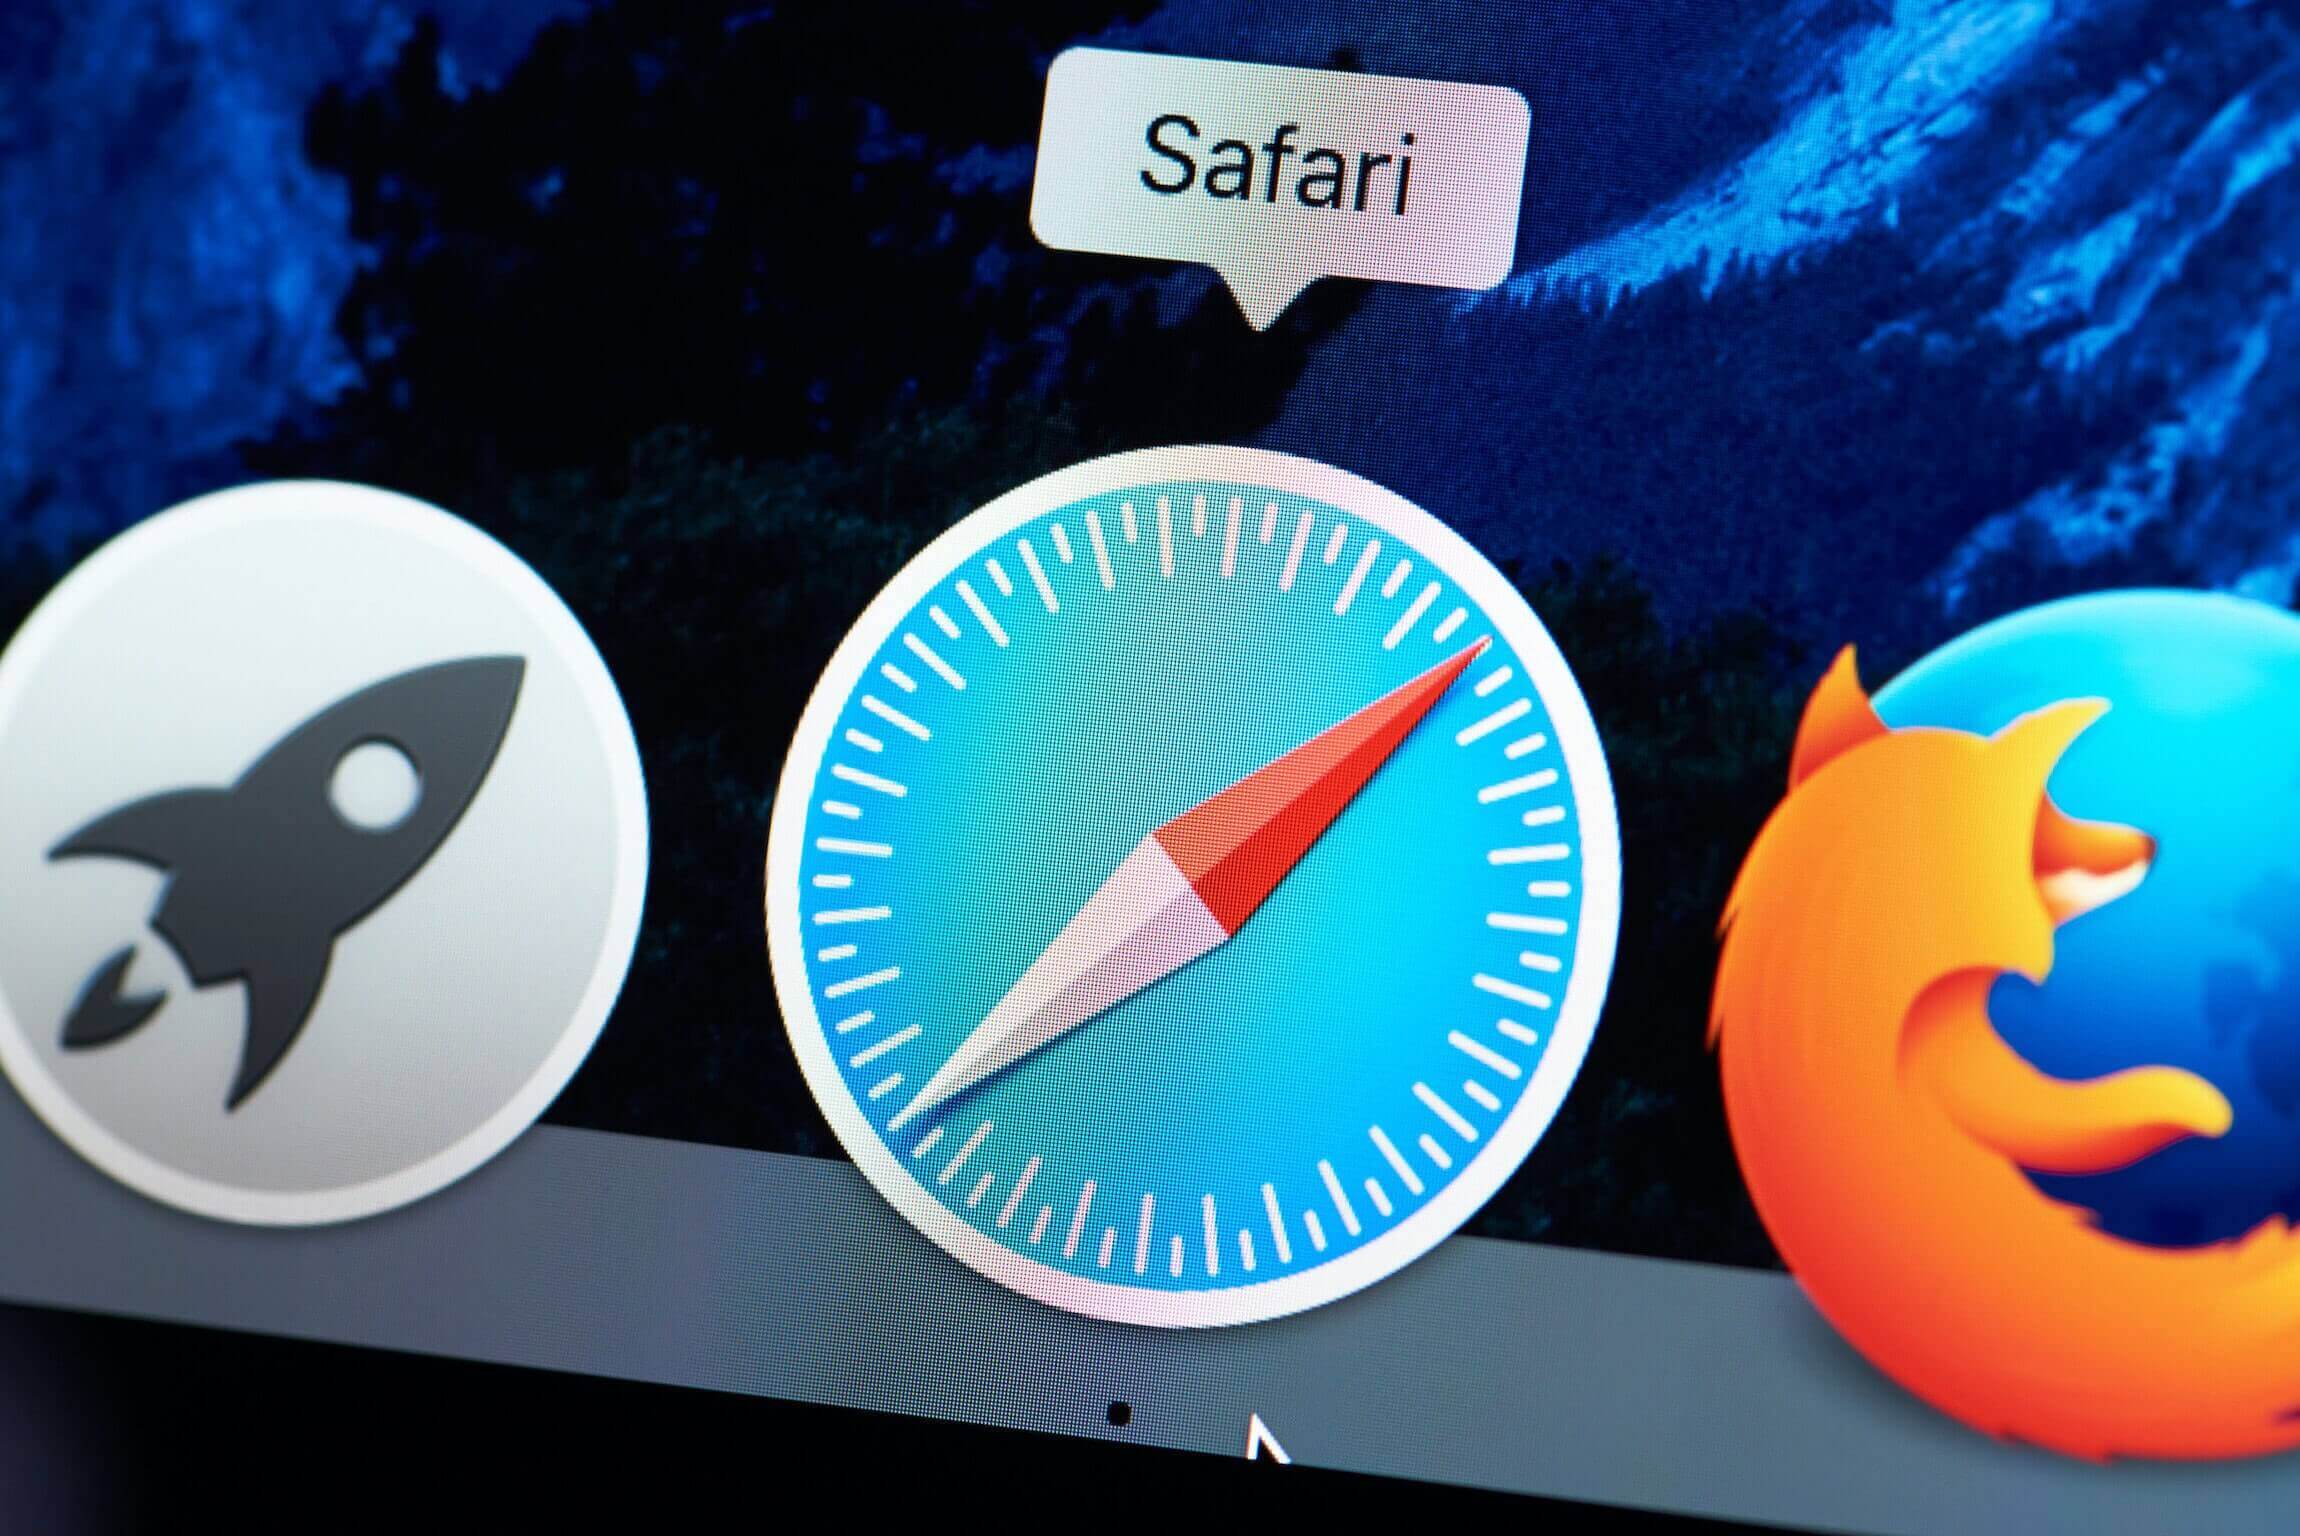 Safari will now block third-party cookies by default, delete a site's local storage after seven days